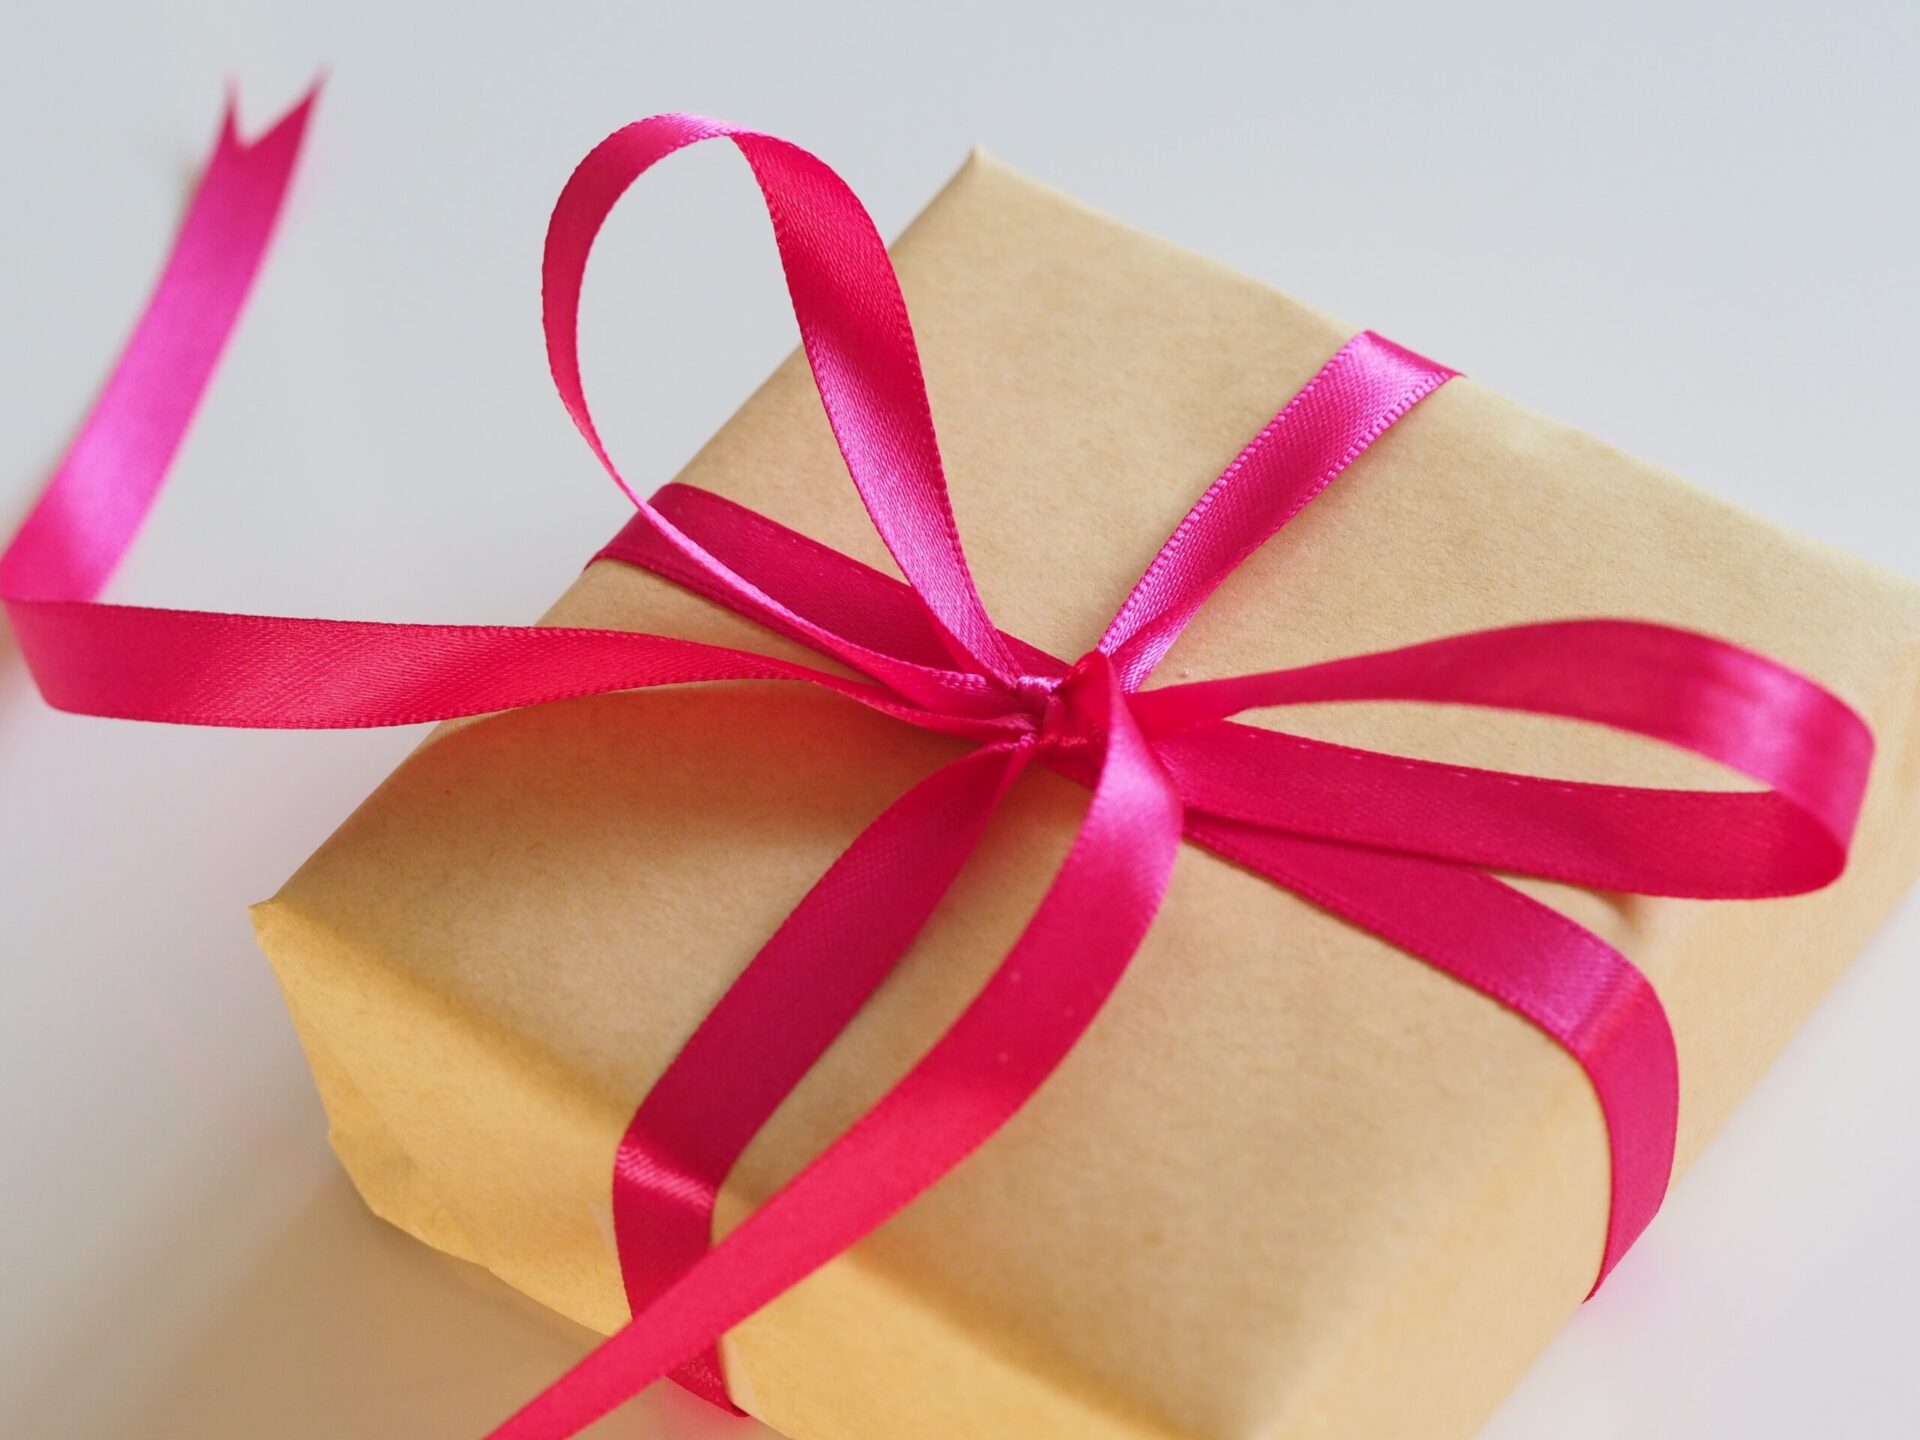 A square box wrapped in brown paper and pink ribbon.